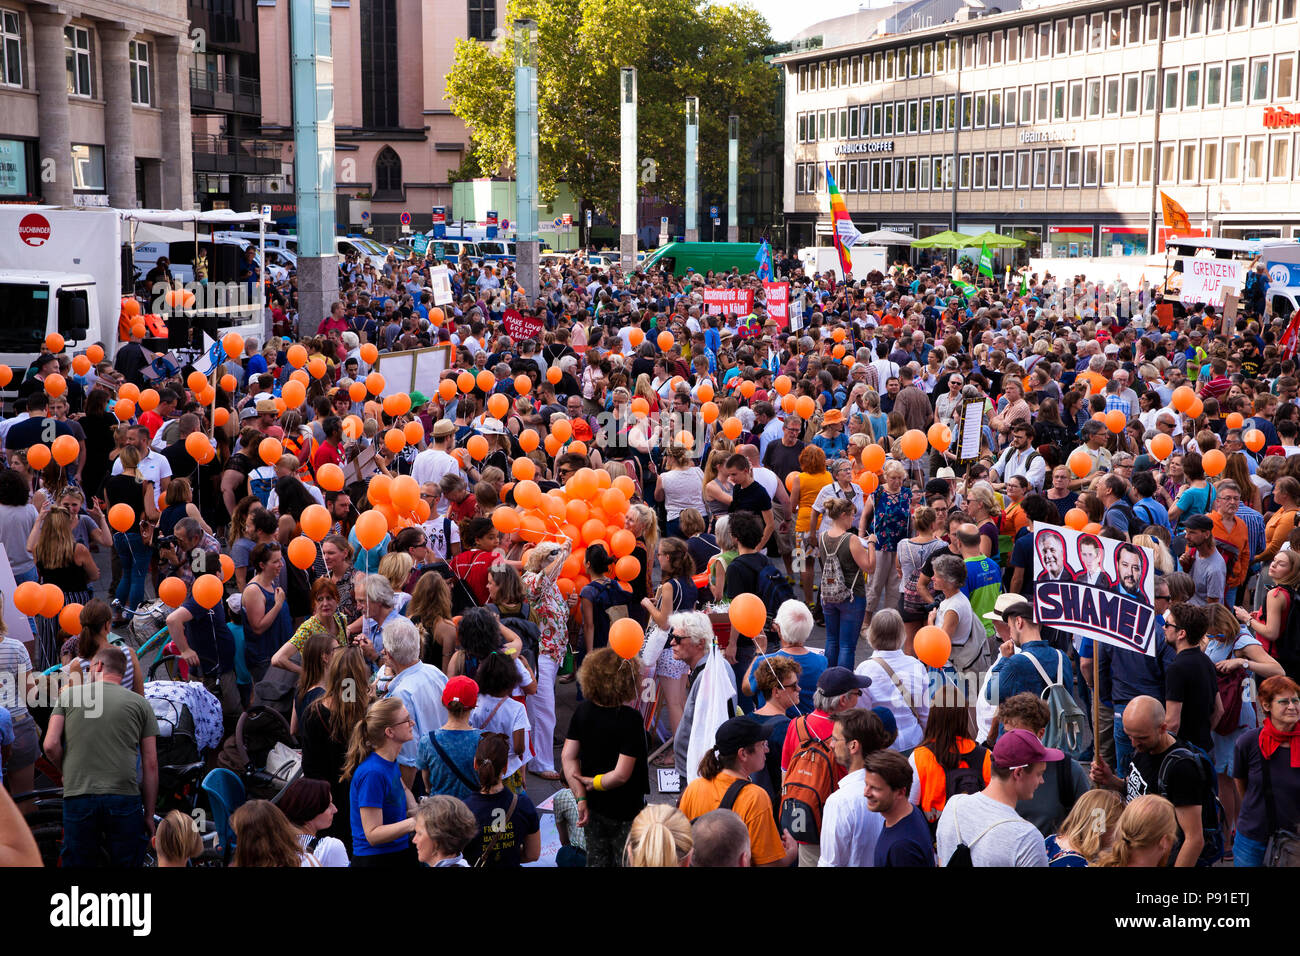 Cologne, Germany, 13 July 2018. Several thousand people demonstrate on July 13, 2018 in Cologne for the rescue of refugees from the Mediterranean Sea. Under the motto 'Stop dying in the Mediterranean', a coalition of initiatives, political groups and private individuals wants to send a signal for humanity. Cologne, Germany.   Credit: Joern Sackermann/Alamy Live News Stock Photo